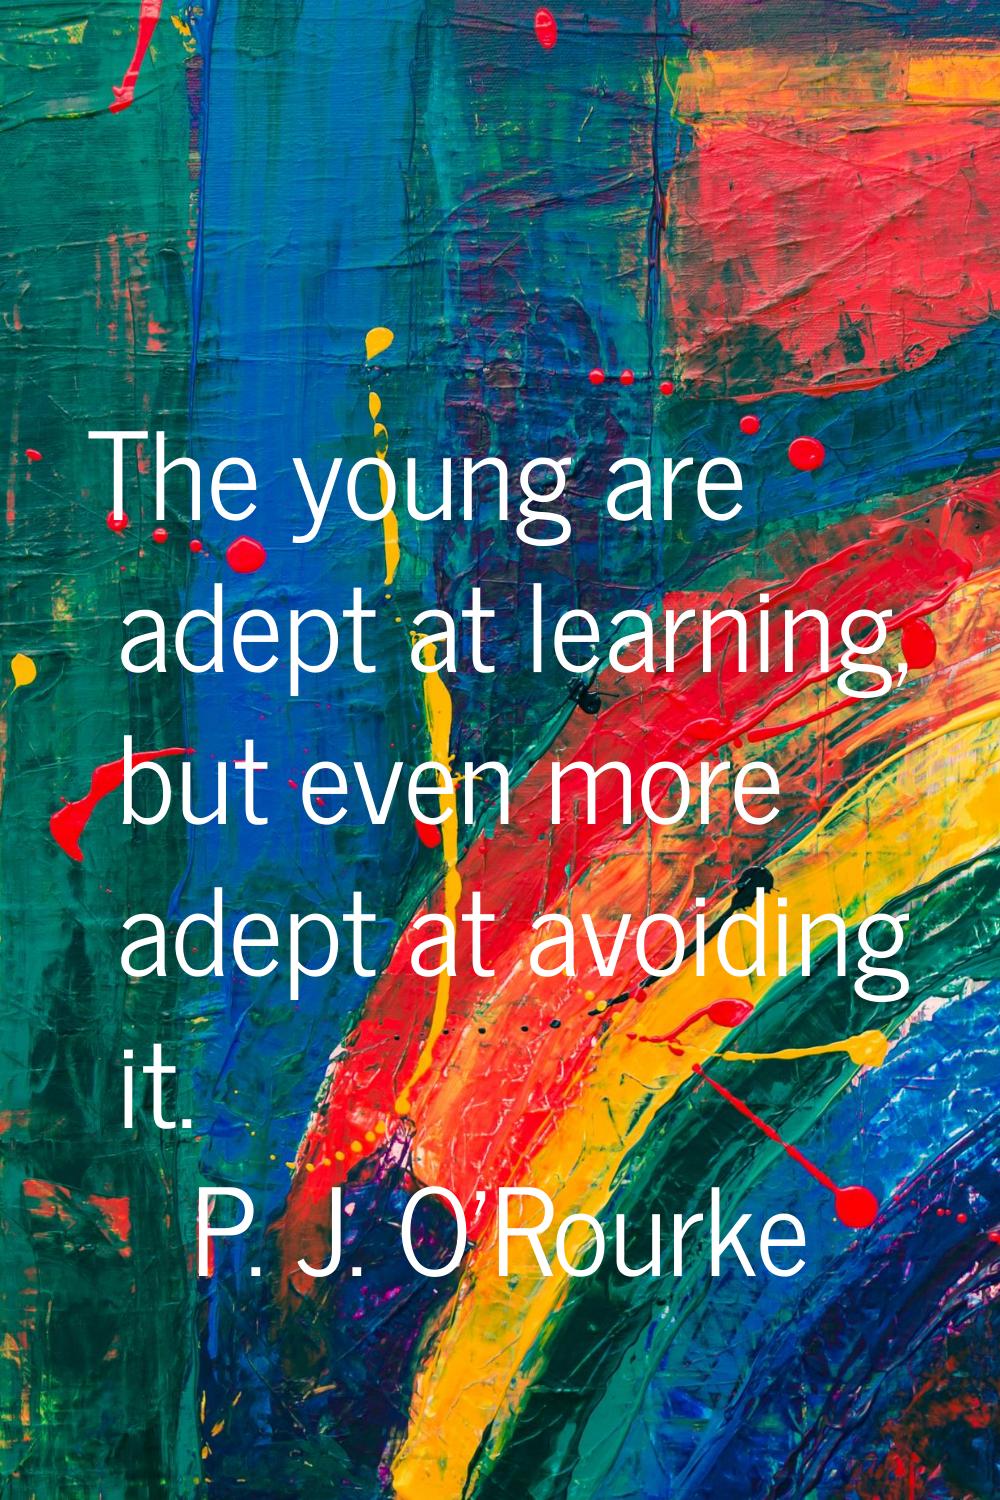 The young are adept at learning, but even more adept at avoiding it.